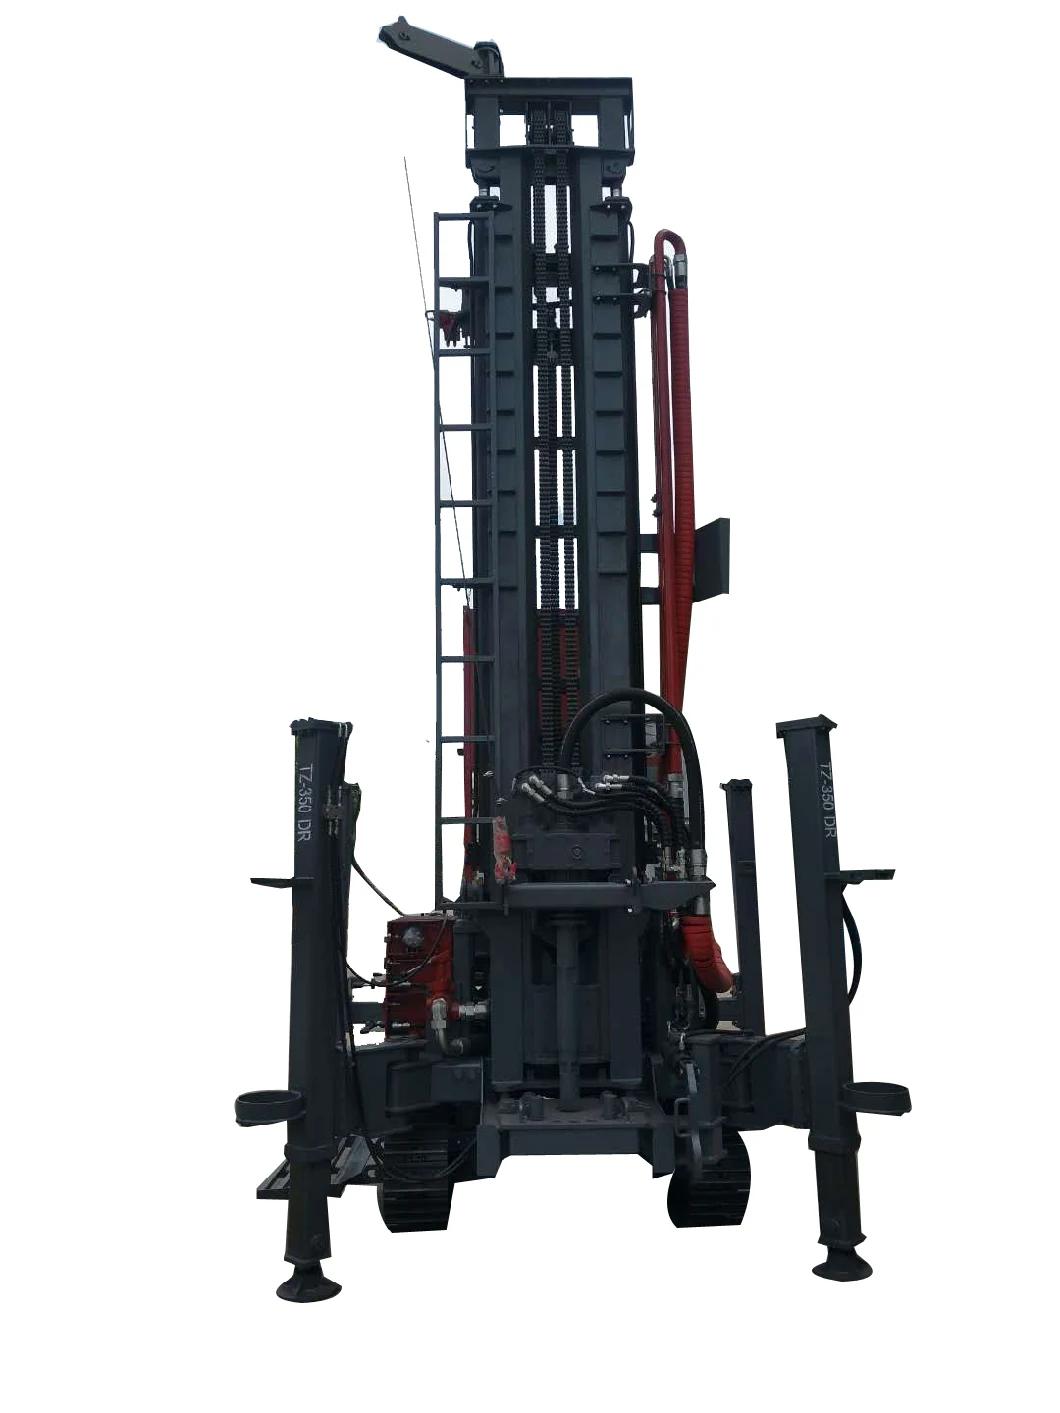 300meters Portable Crawler Water Well Drilling Rig